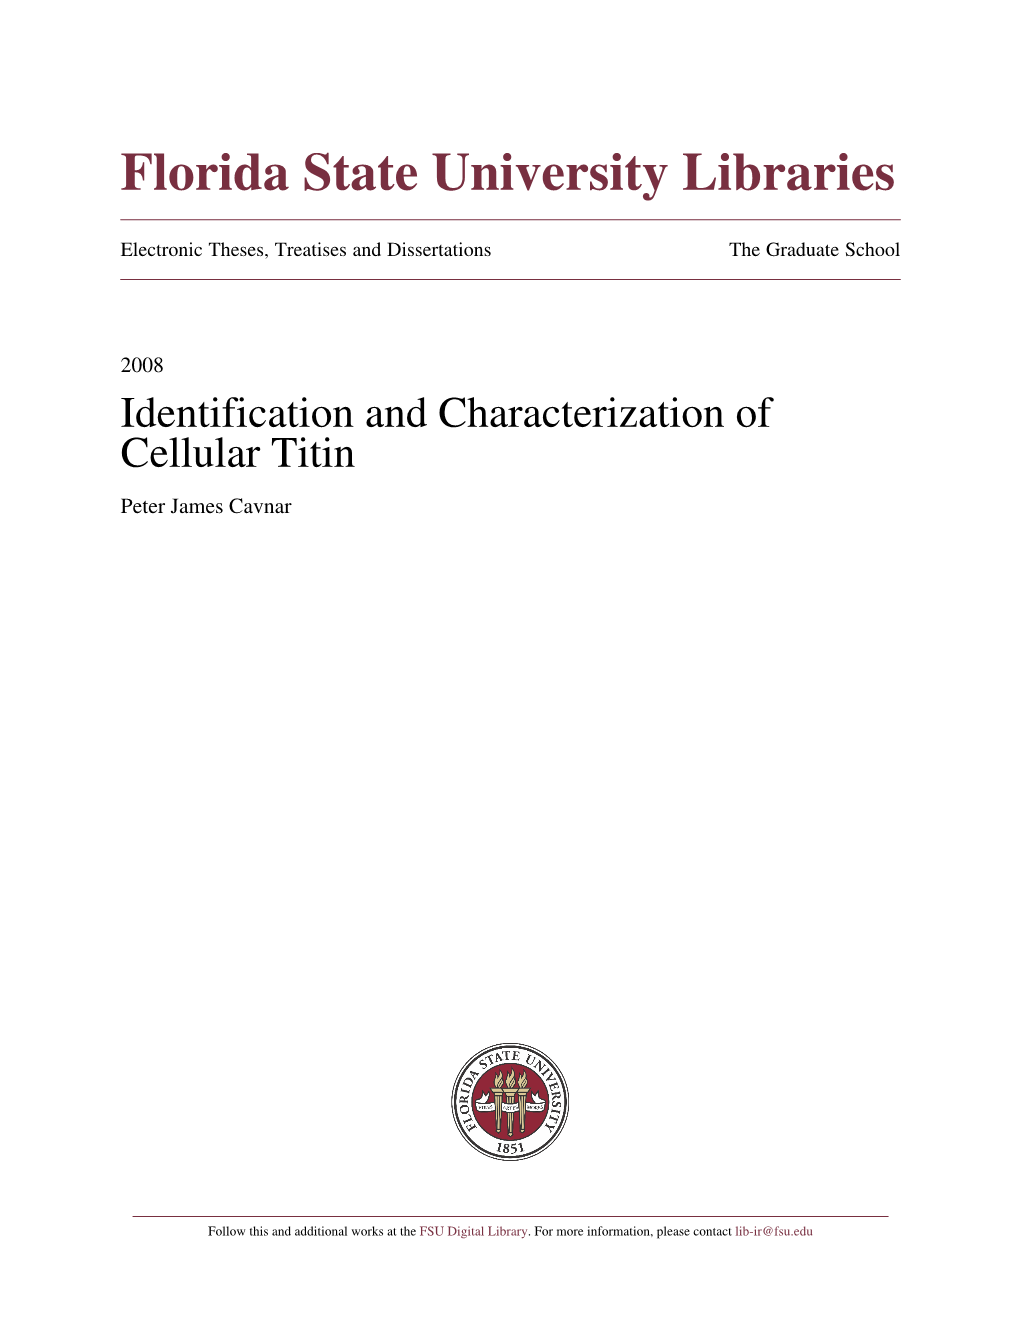 Identification and Characterization of Cellular Titin Peter James Cavnar